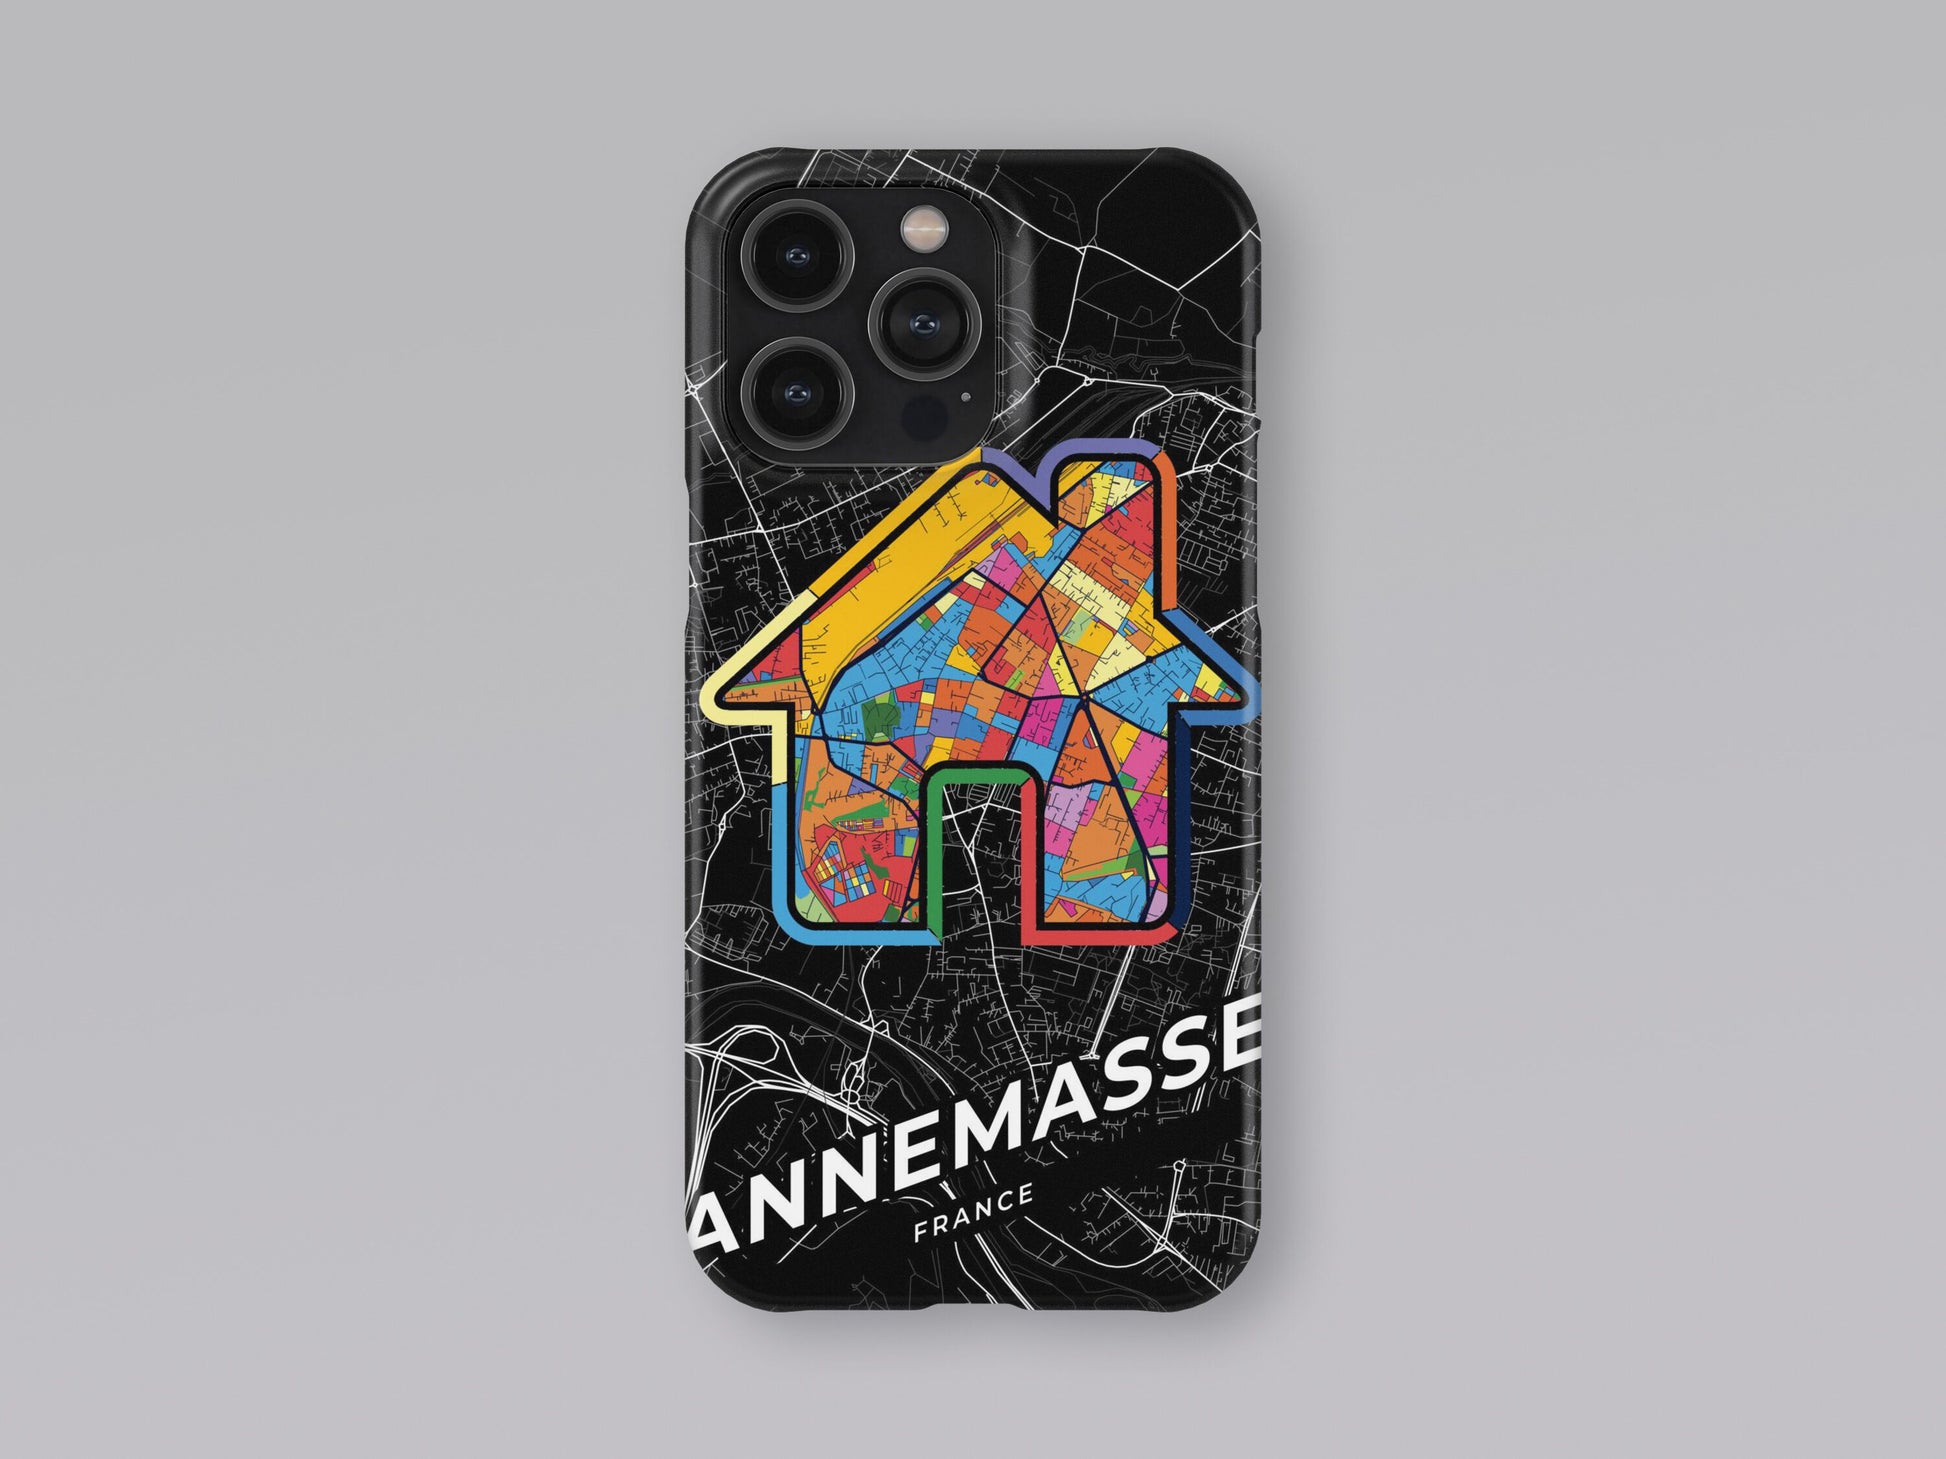 Annemasse France slim phone case with colorful icon. Birthday, wedding or housewarming gift. Couple match cases. 3